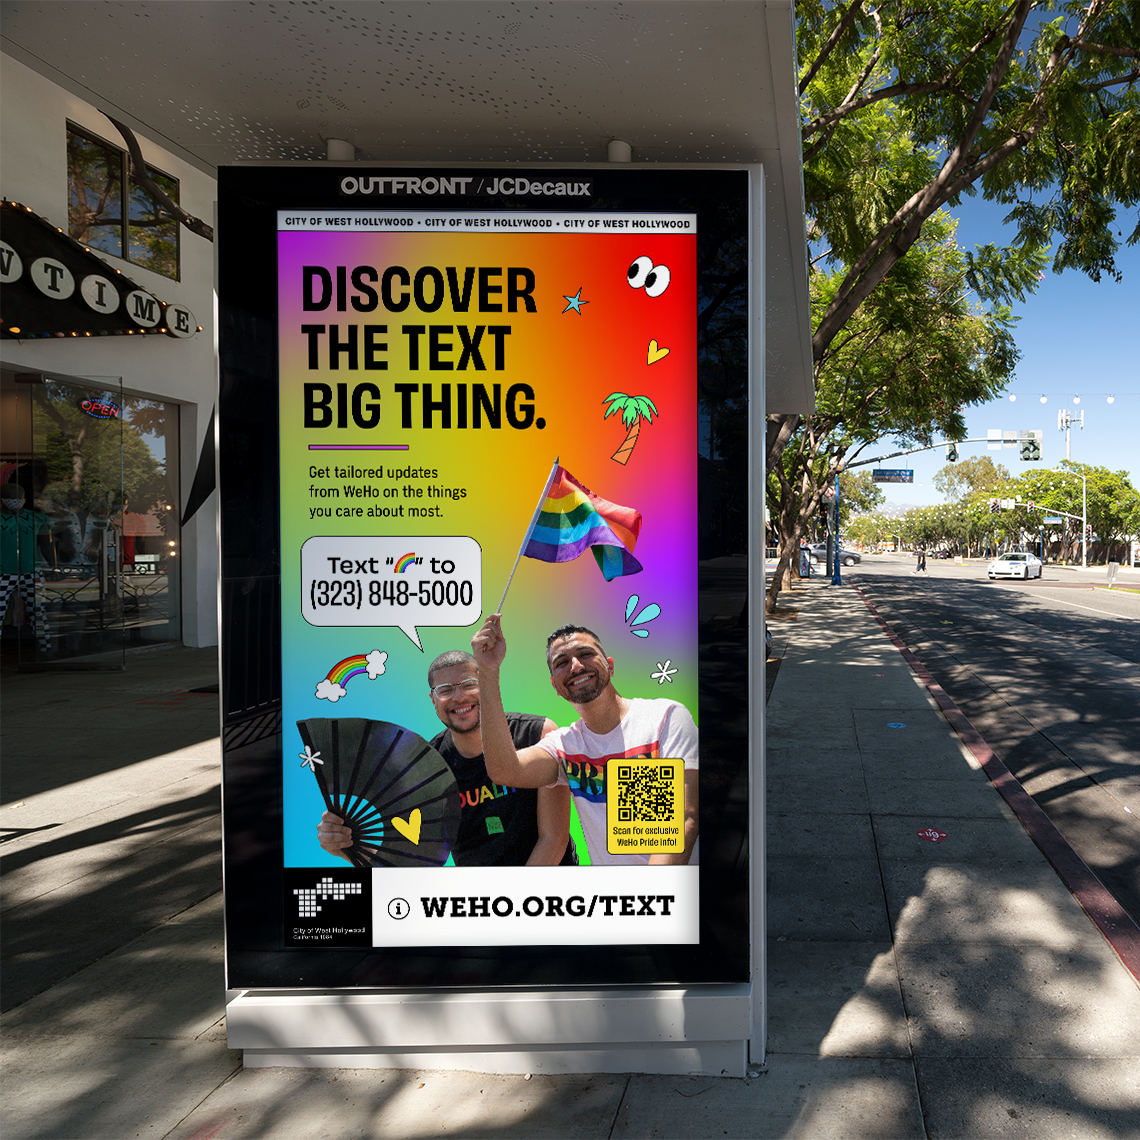 Digital Bus Shelter Ad from Text WeHo campaign for the City of West Hollywood, designed by Kilter.